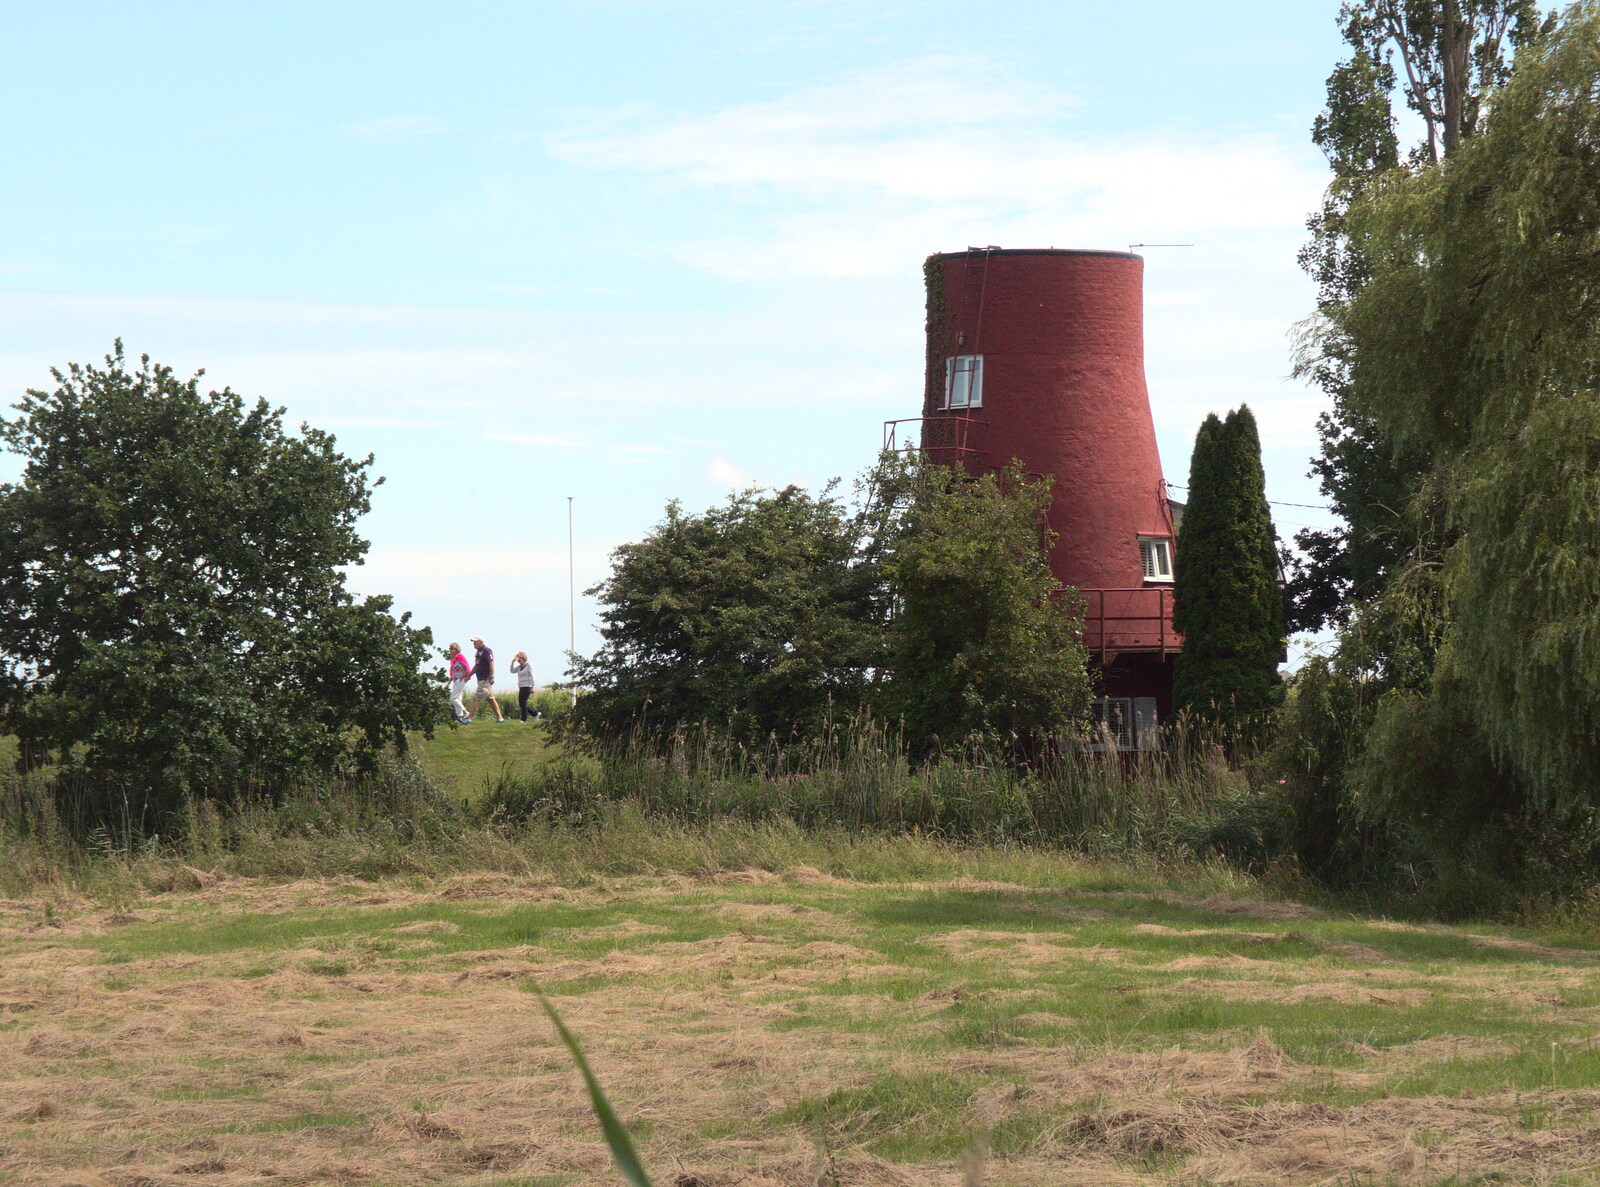 A topless wind pump from The Humpty Dumpty Beer Festival, Reedham, Norfolk - 22nd July 2017